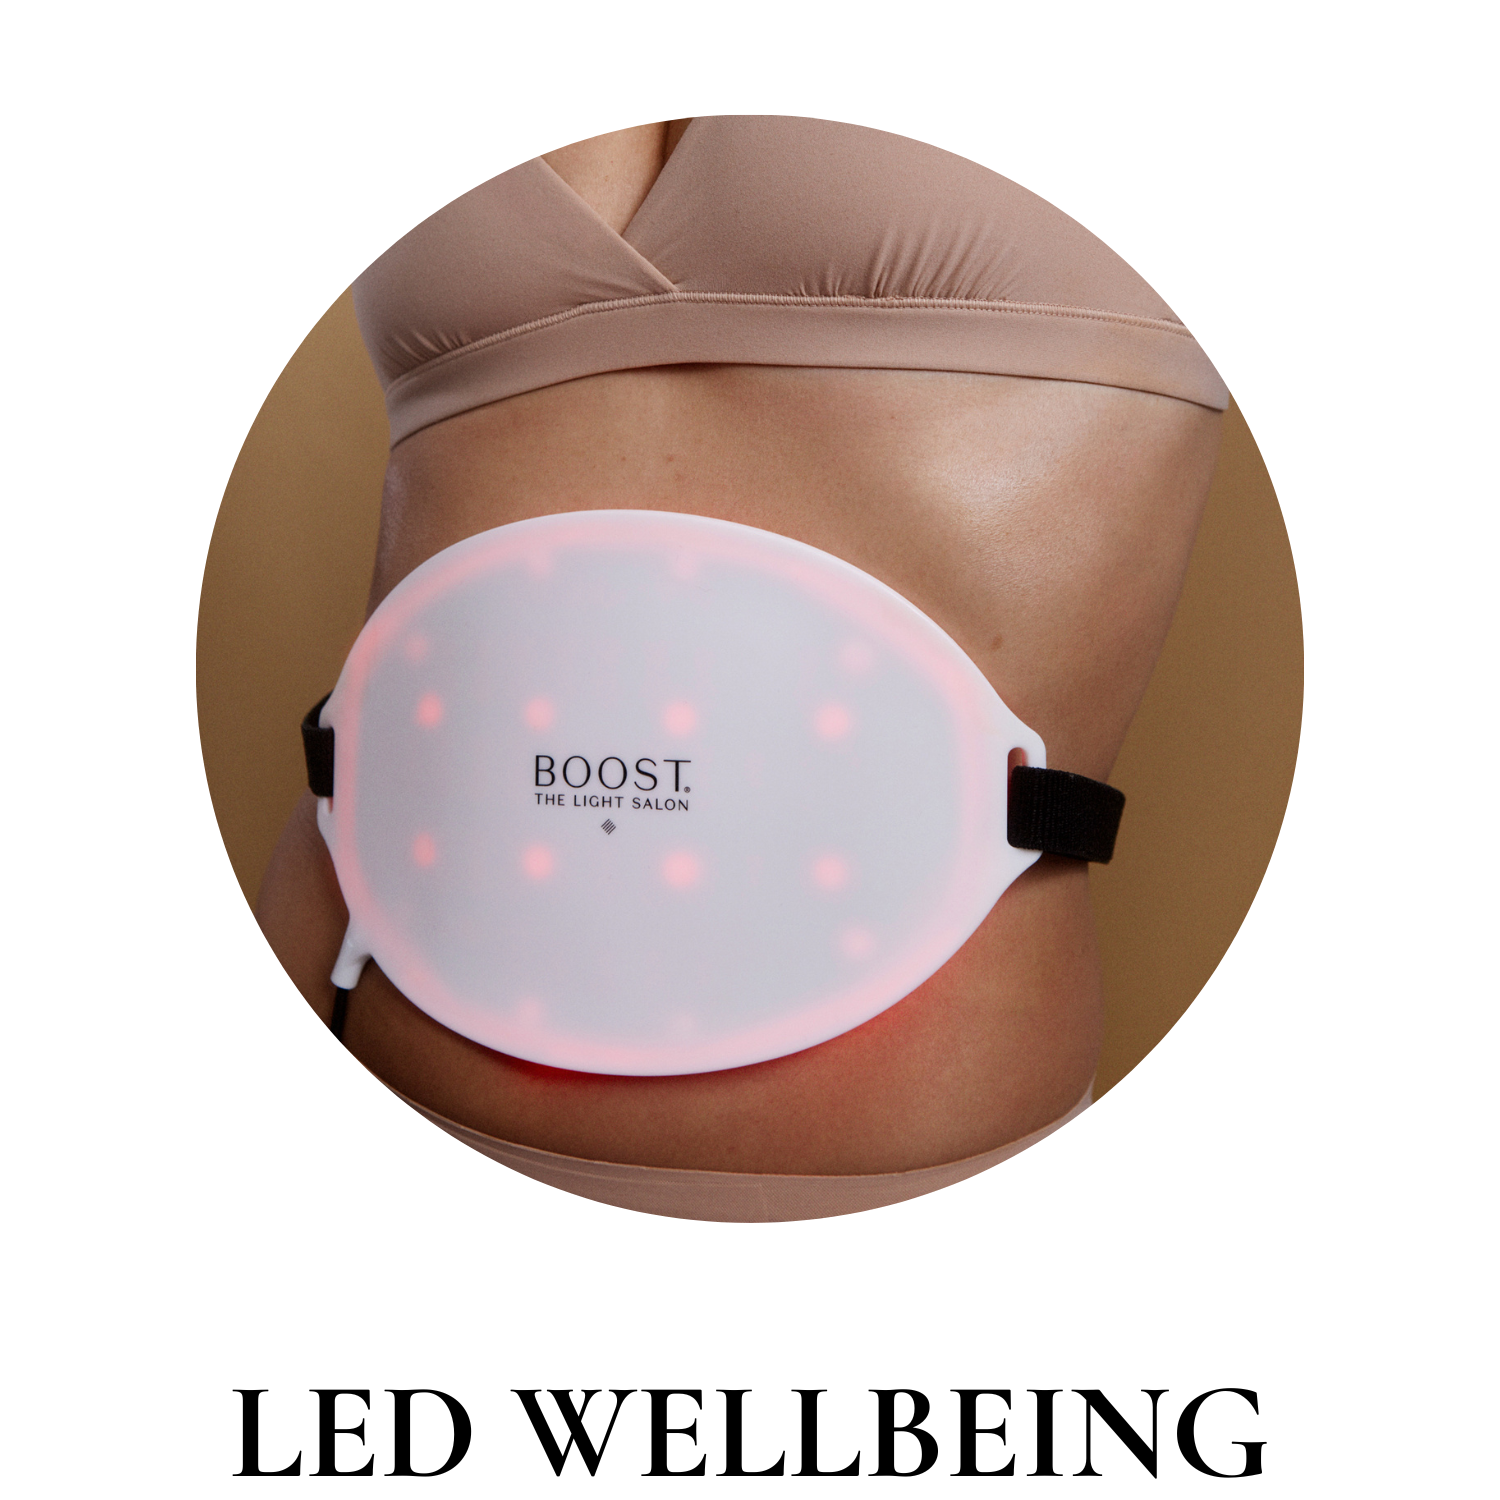 Led Wellbeing